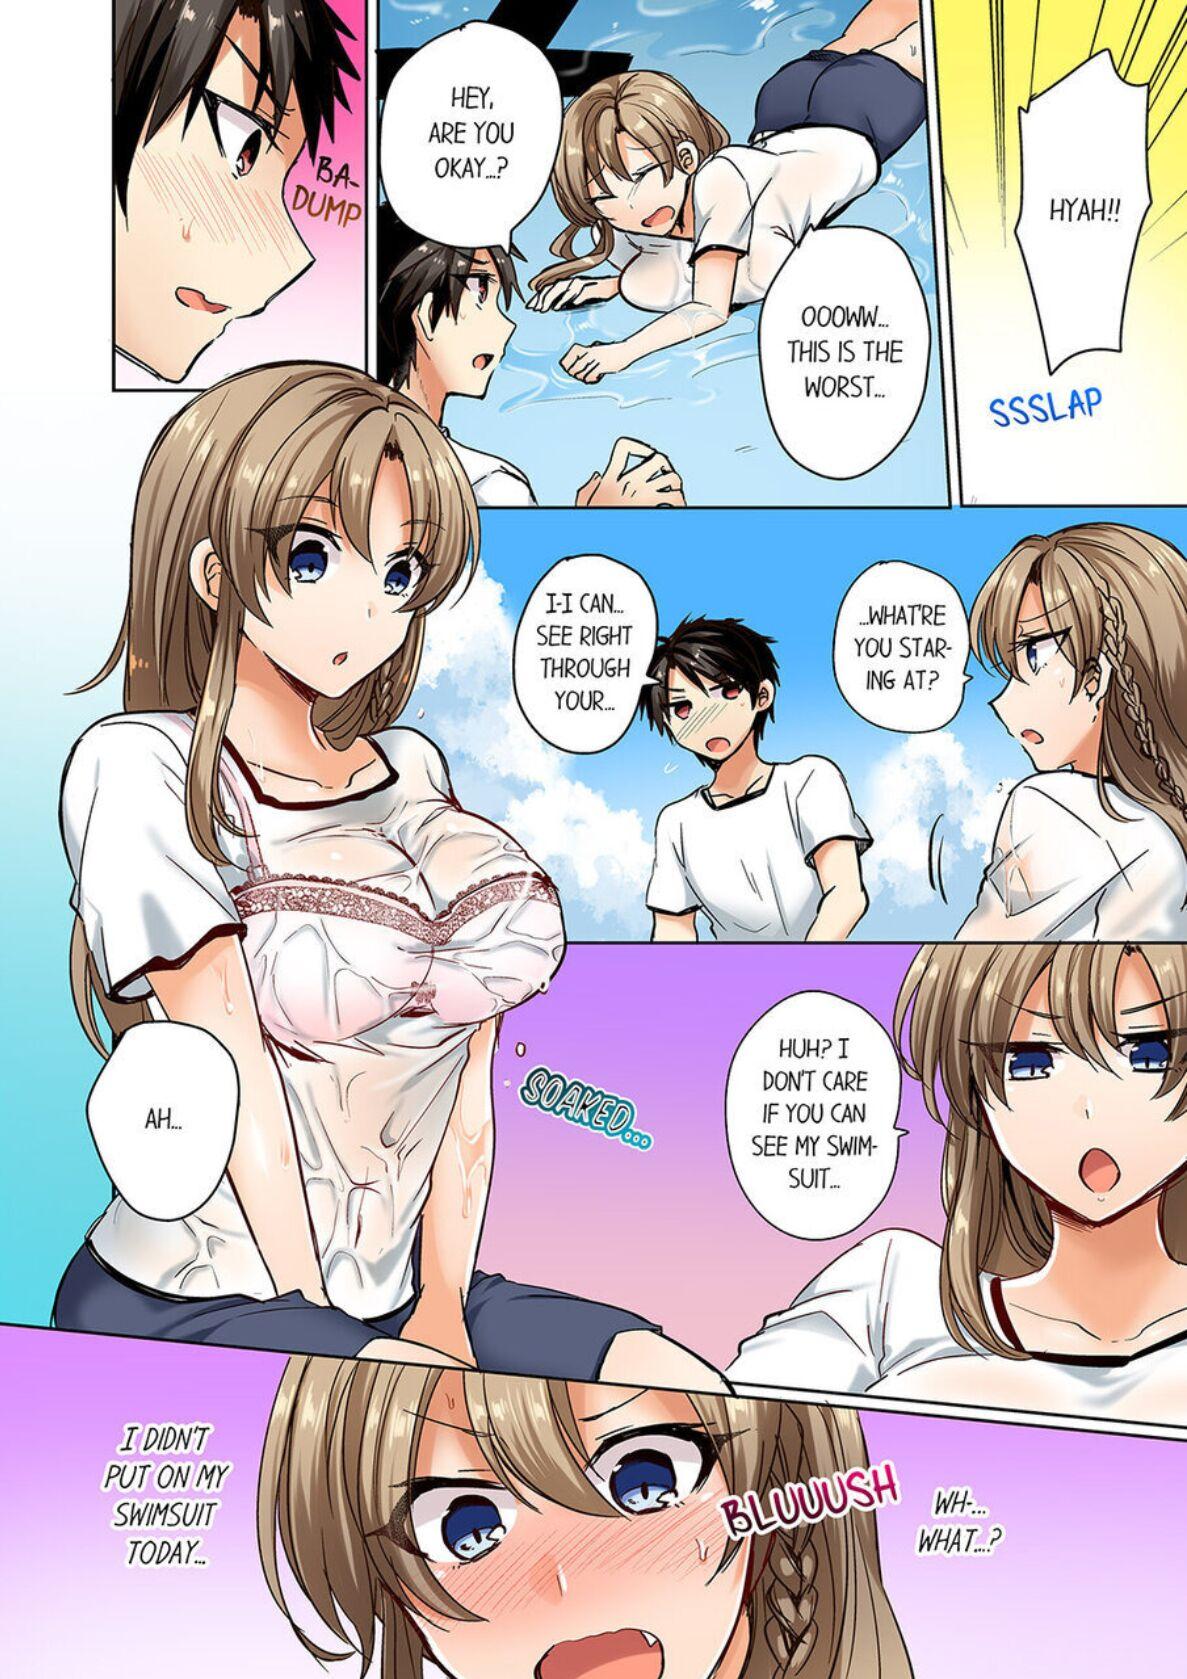 Dick My Swimsuit Slipped... And it went in!? A Mixed Synchronized Swimming Club with More Than Just Nip Slips in Store! ~ 1 Cuckolding - Page 8